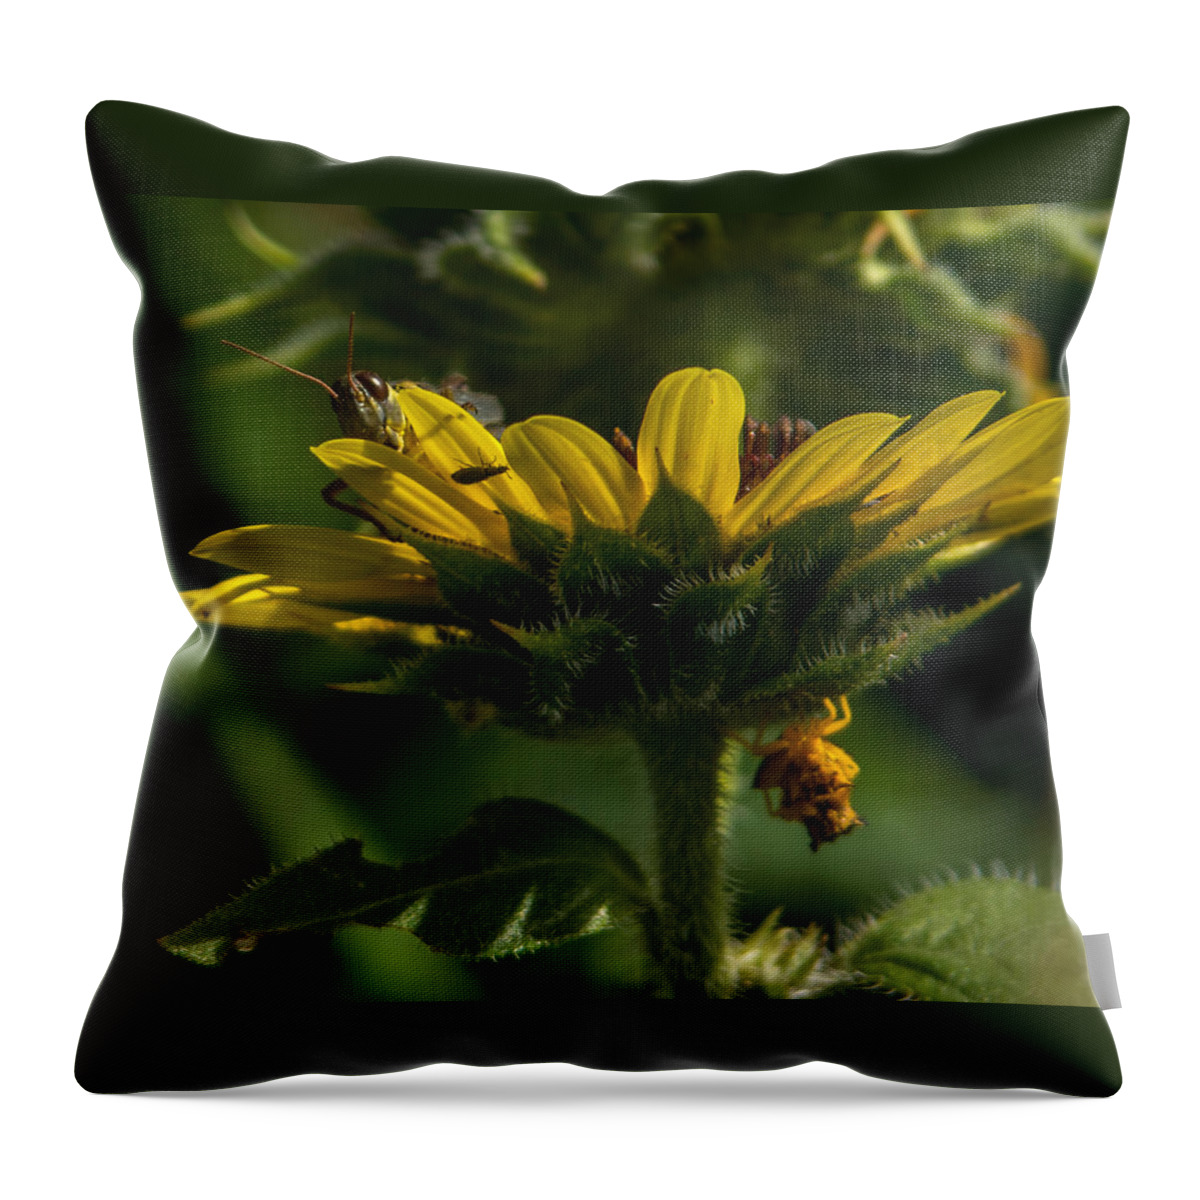 Grasshopper Throw Pillow featuring the photograph A Bugs World by Ernest Echols